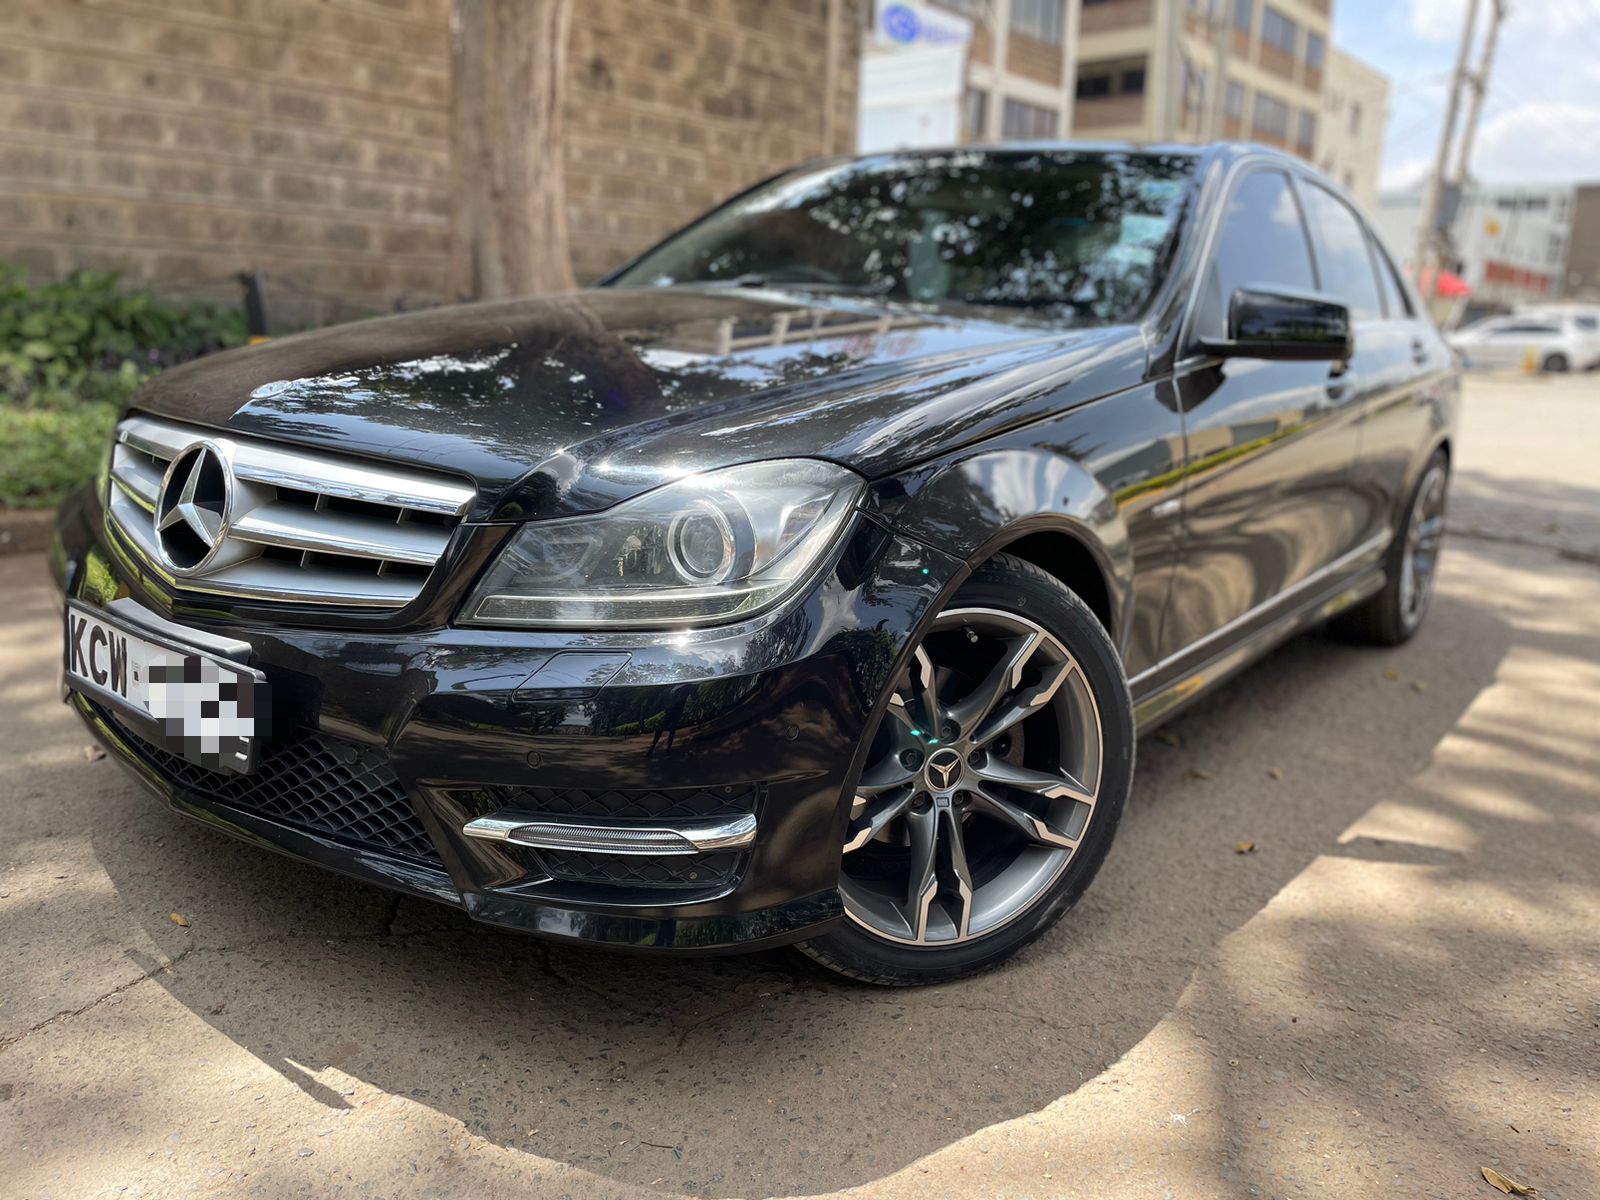 Mercedes Benz C200 2013 Black Beauty You Pay 30% DEPOSIT Trade in OK